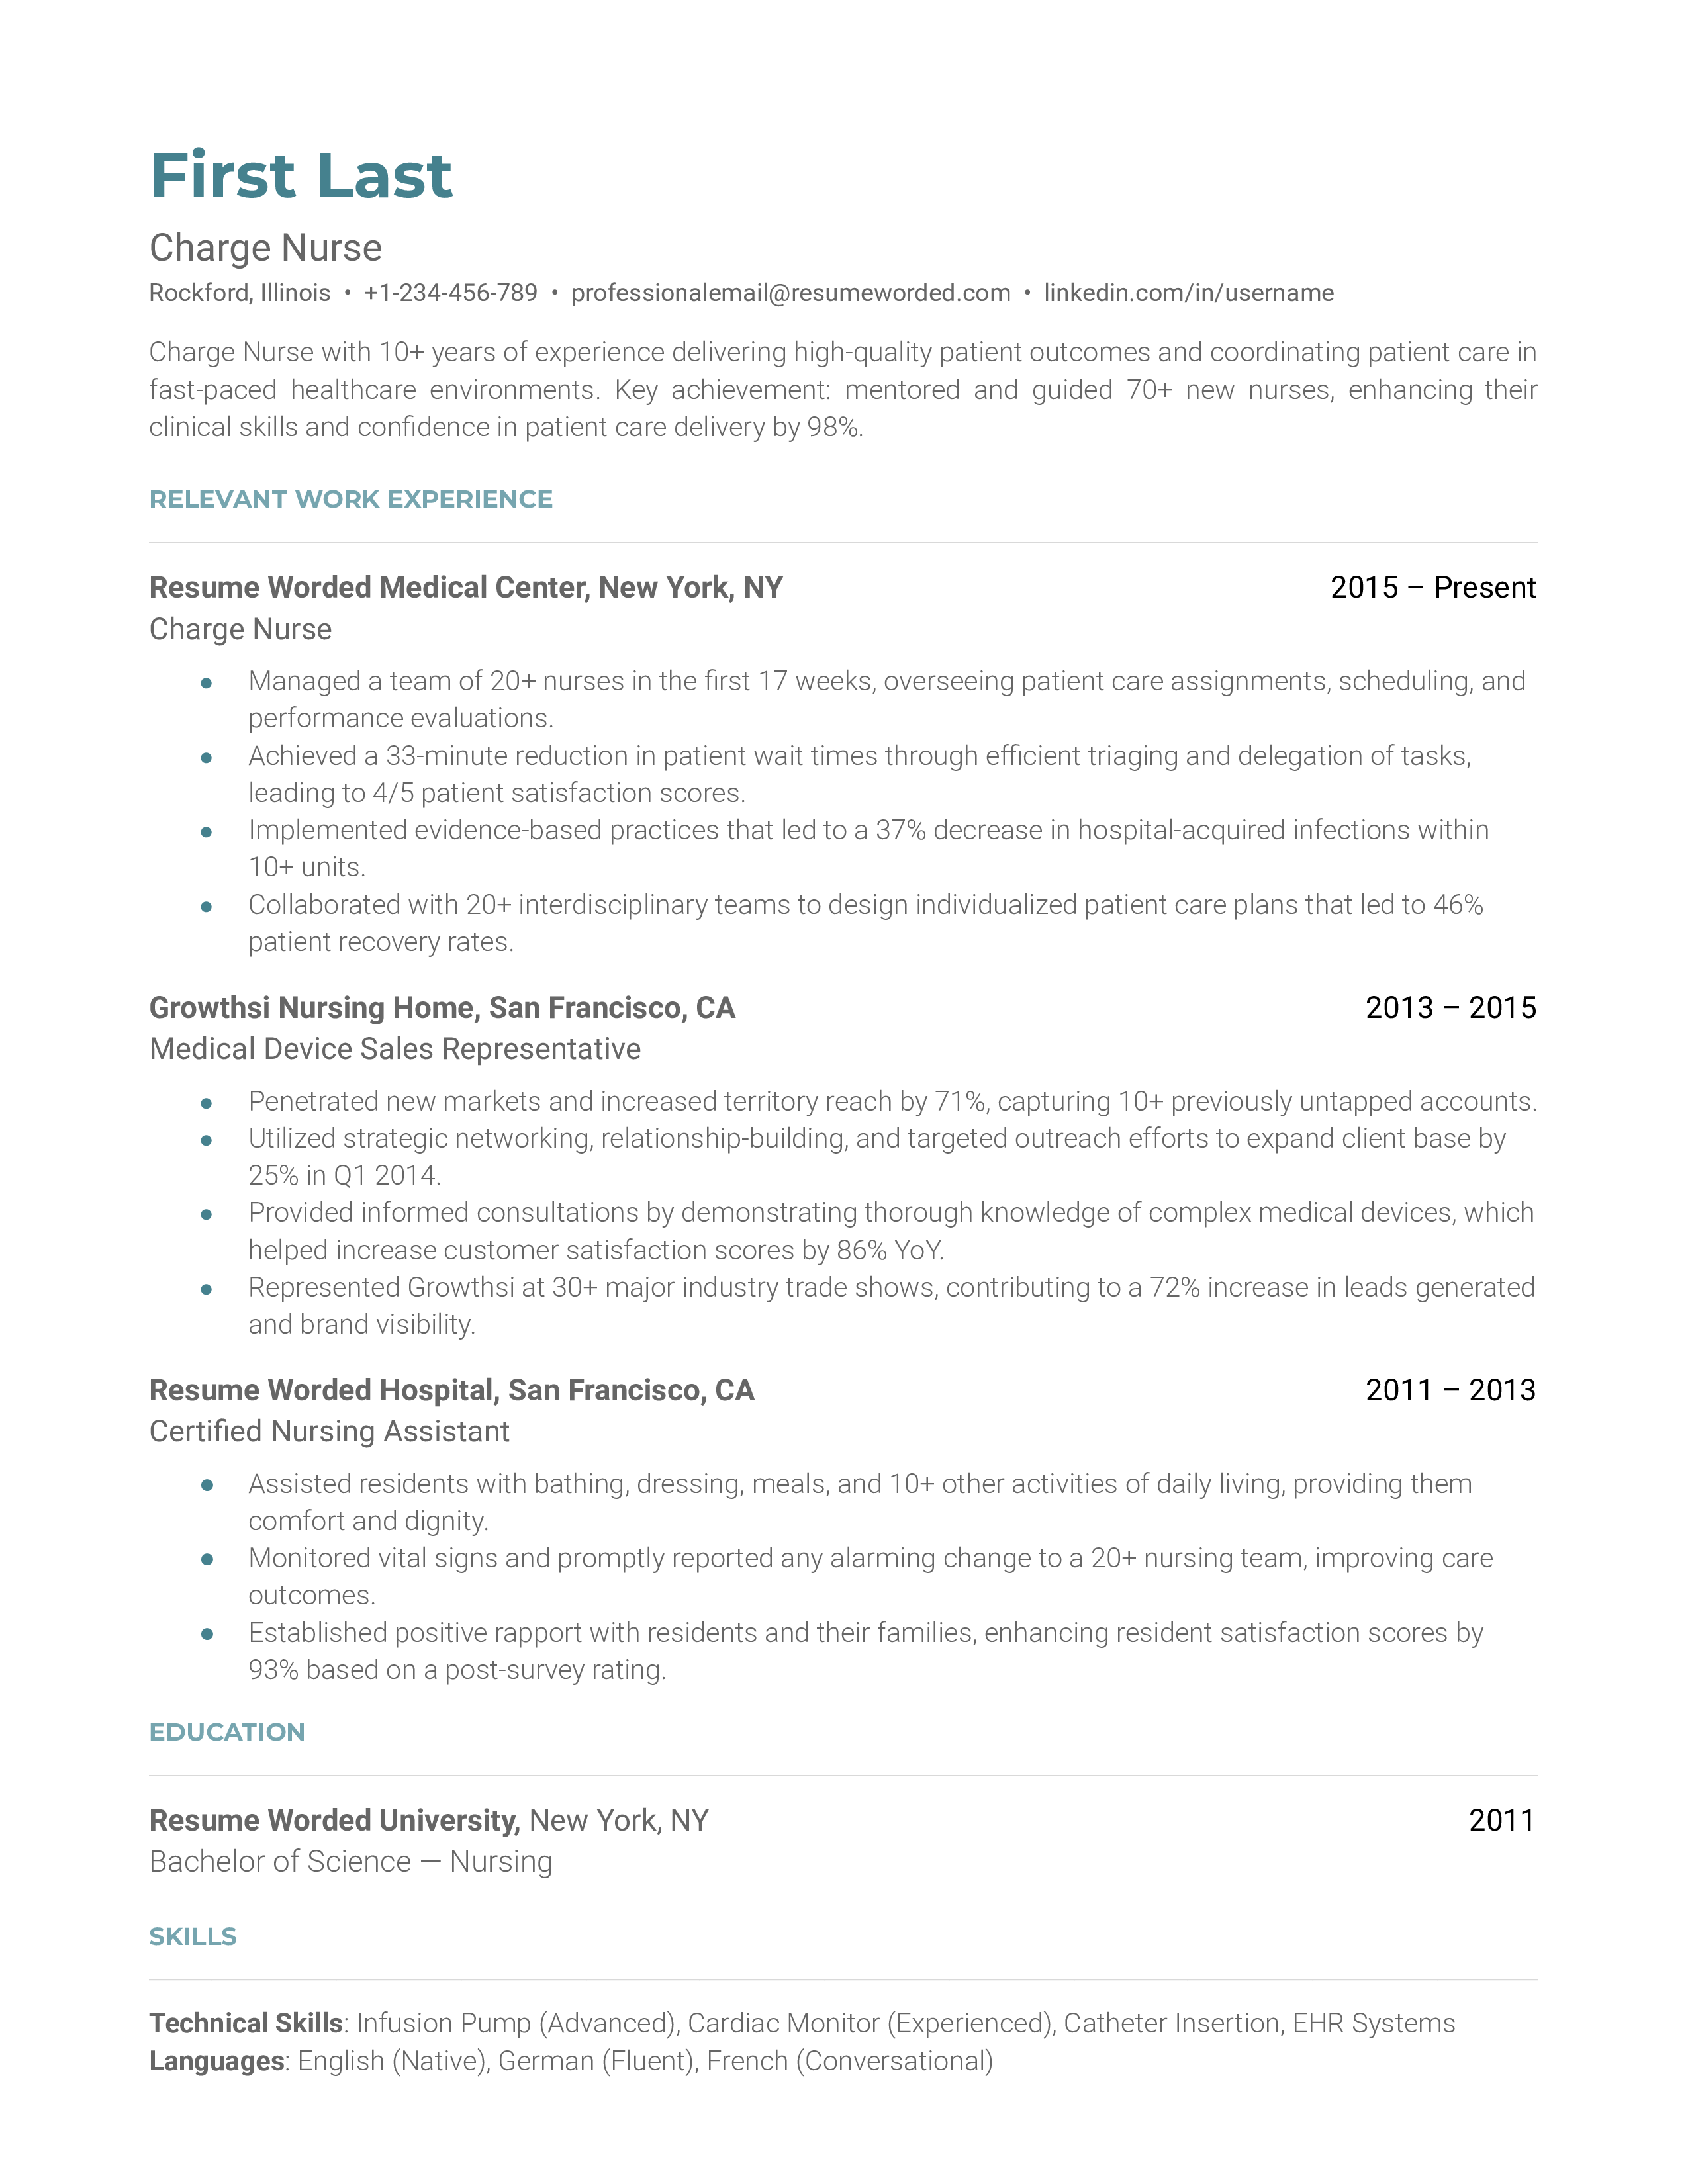 A resume of a Charge Nurse showcasing leadership experience and certifications.